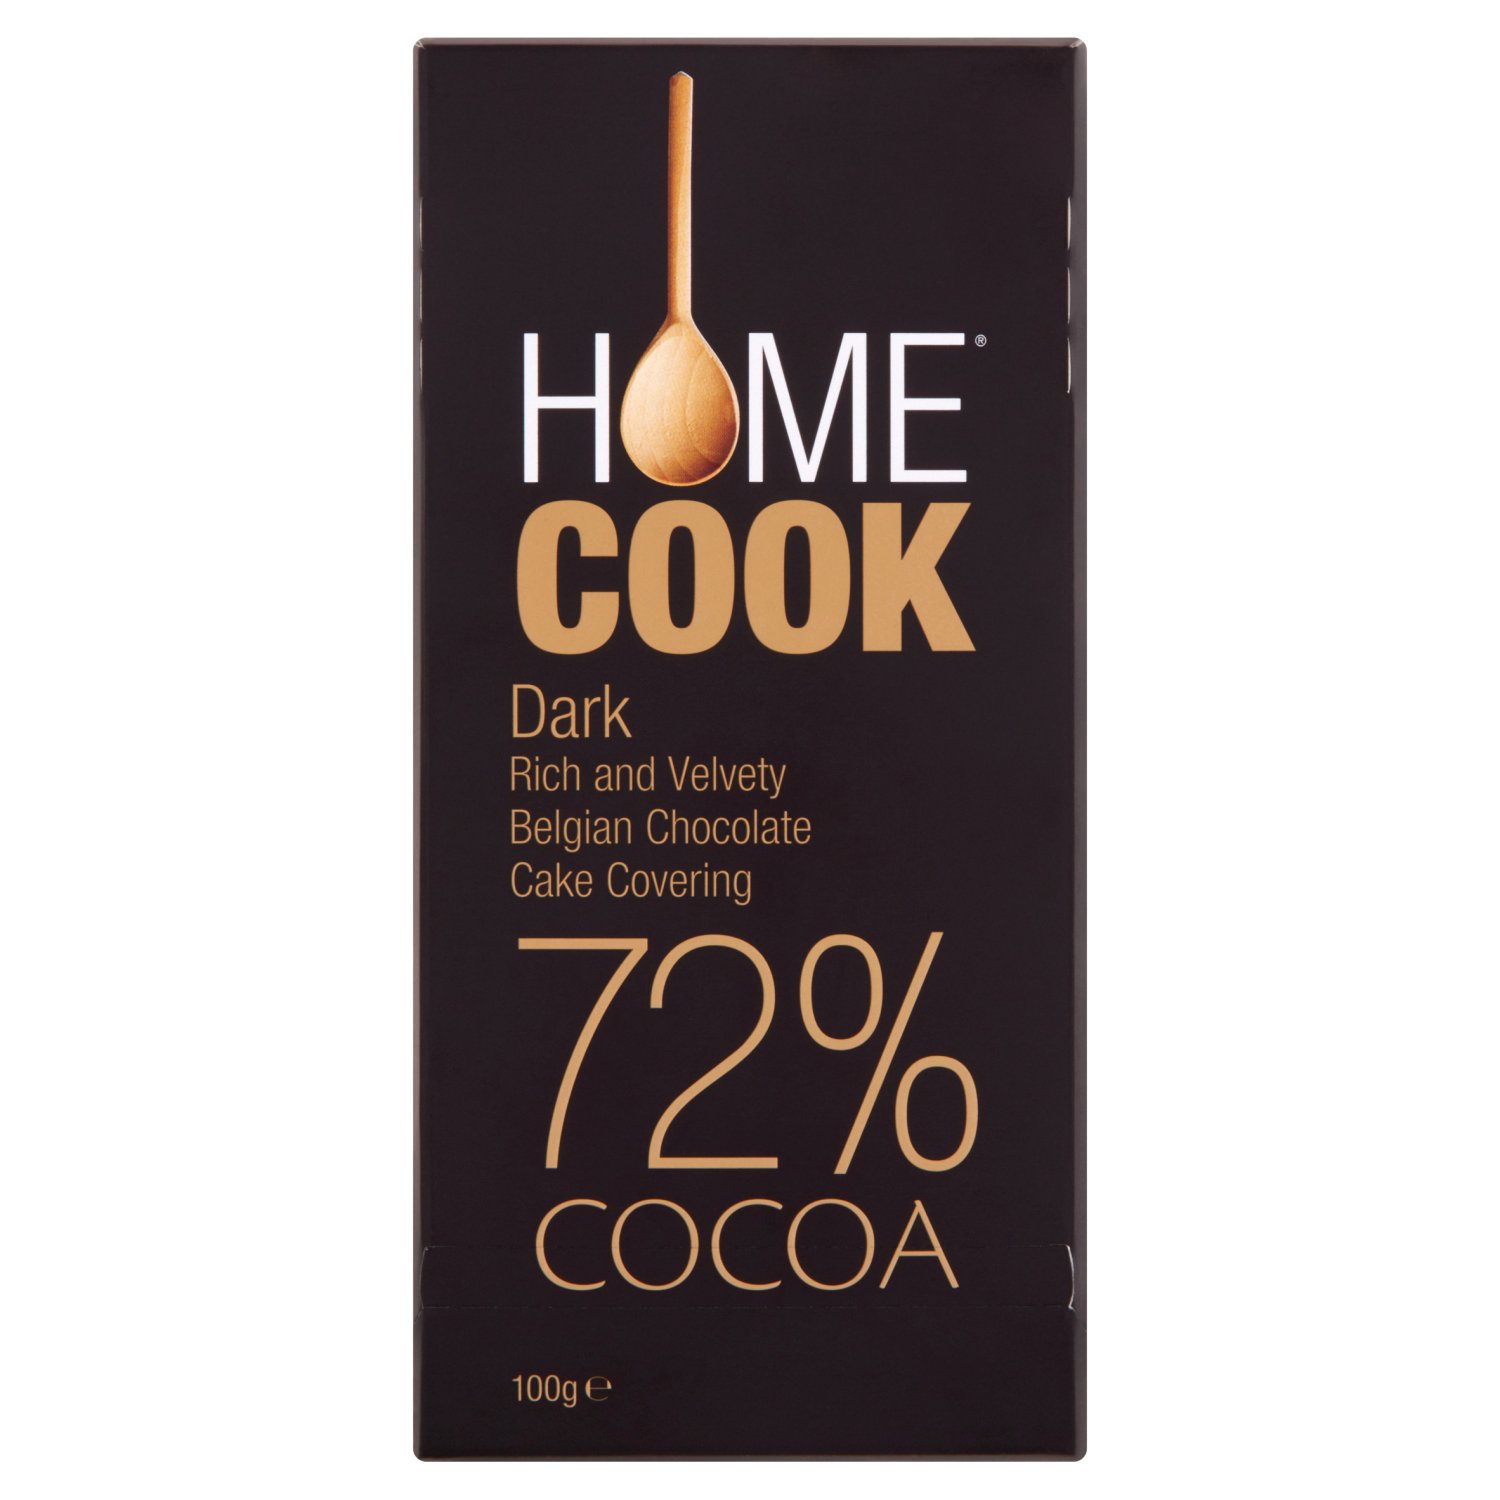 Homecook 72% Cocoa Cake Covering (100 g)